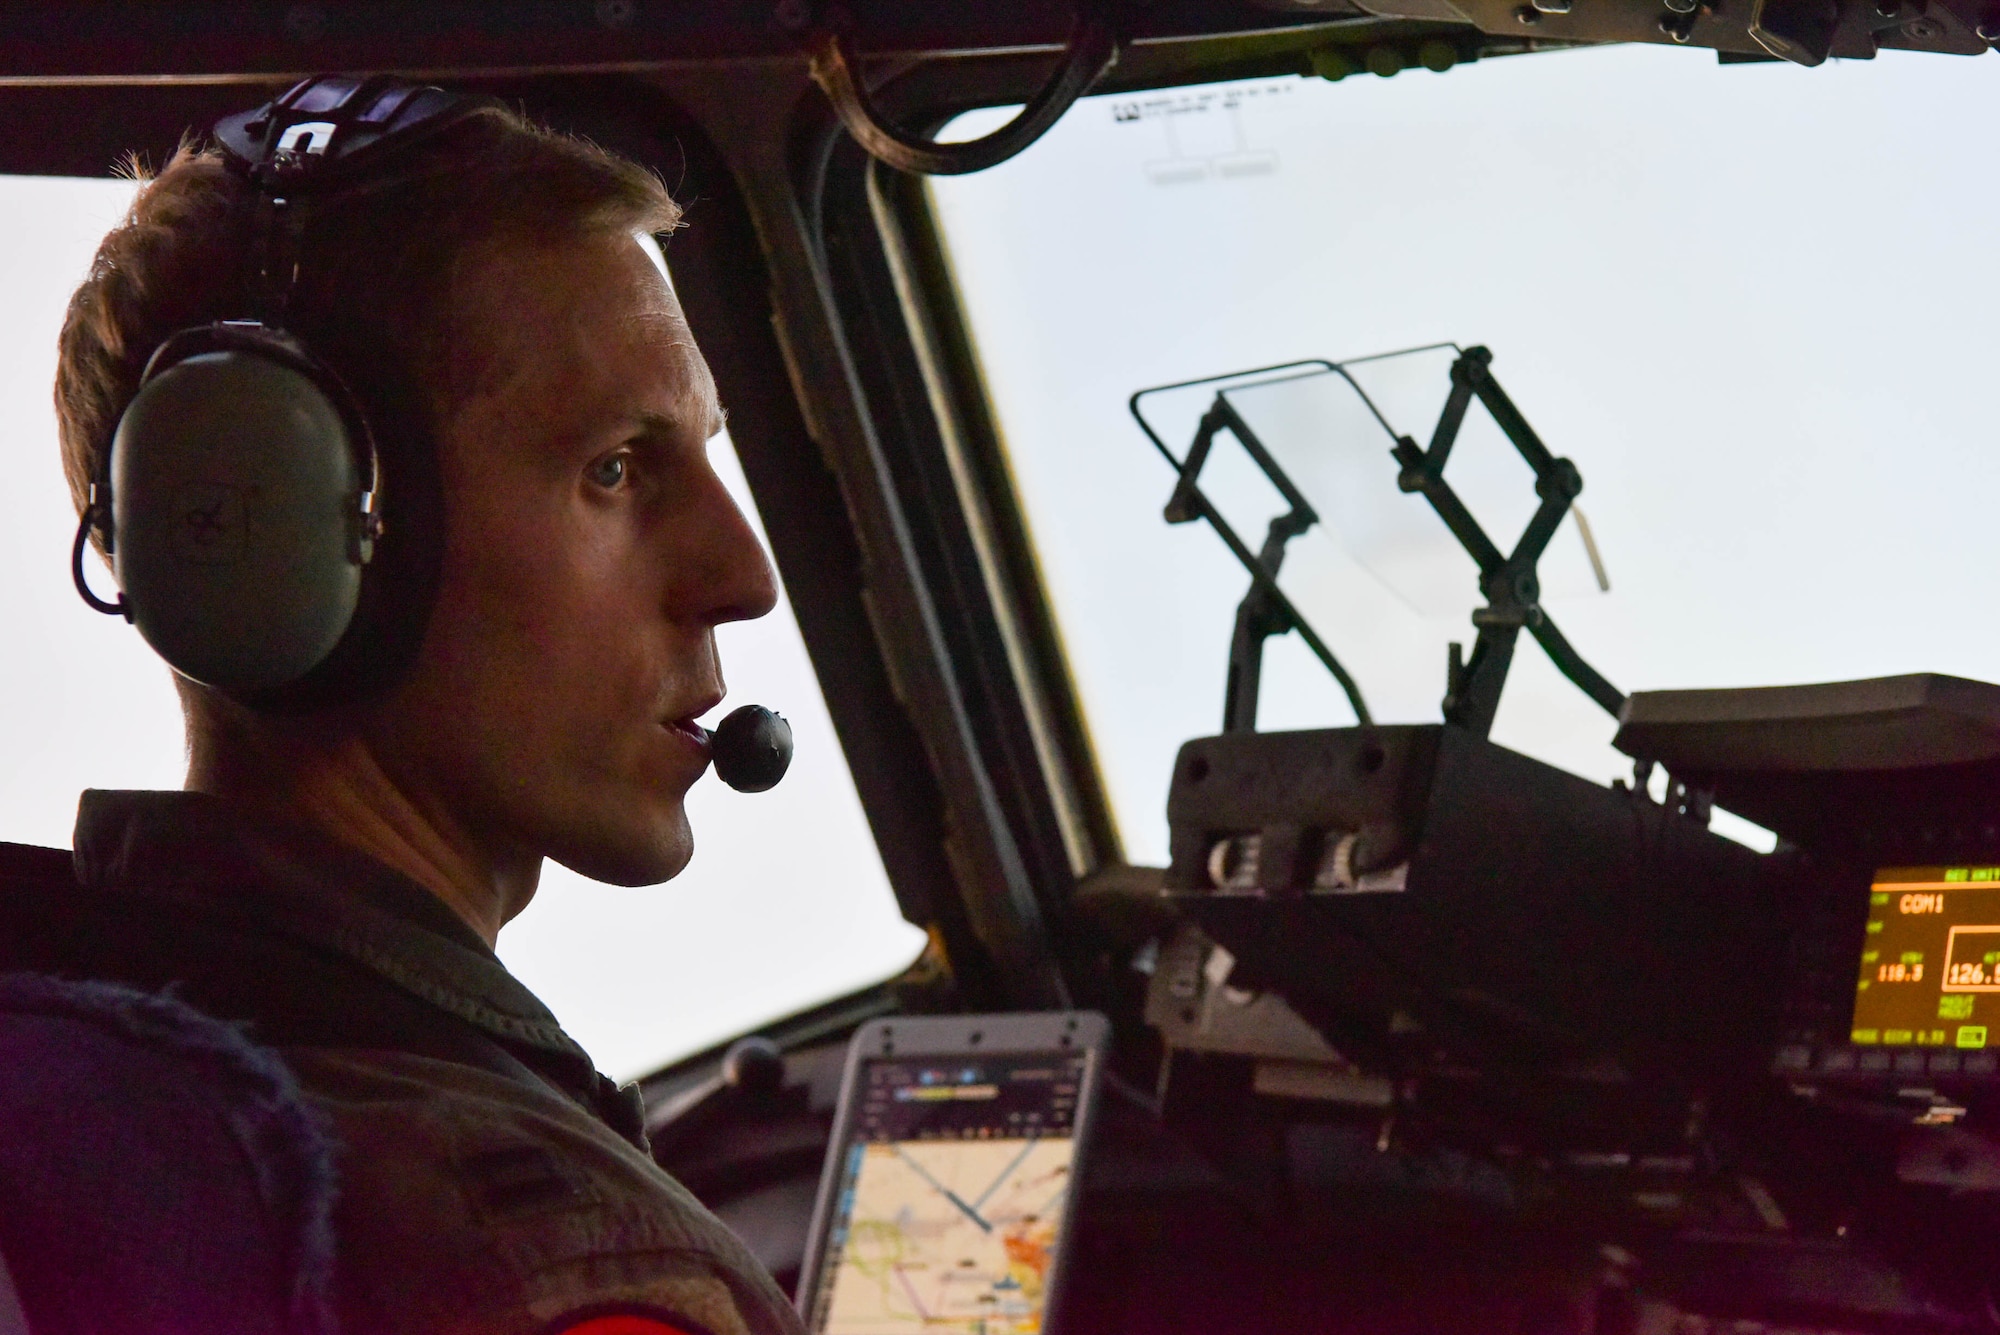 U.S. Air Force Capt. Christopher Abrahamsen, 535th Airlift Squadron instructor pilot, talks with a co-pilot in the cockpit of a C-17 Globemaster III during Exercise Global Dexterity at Joint Base Pearl Harbor-Hickam, Hawaii, May 5, 2022. The 15th Wing invited the Royal Australian Air Force No. 36 Squadron to join in a bilateral C-17-focused exercise to better increase interoperability for future Indo-Pacific operations. (U.S. Air Force photo by Airman 1st Class Makensie Cooper)